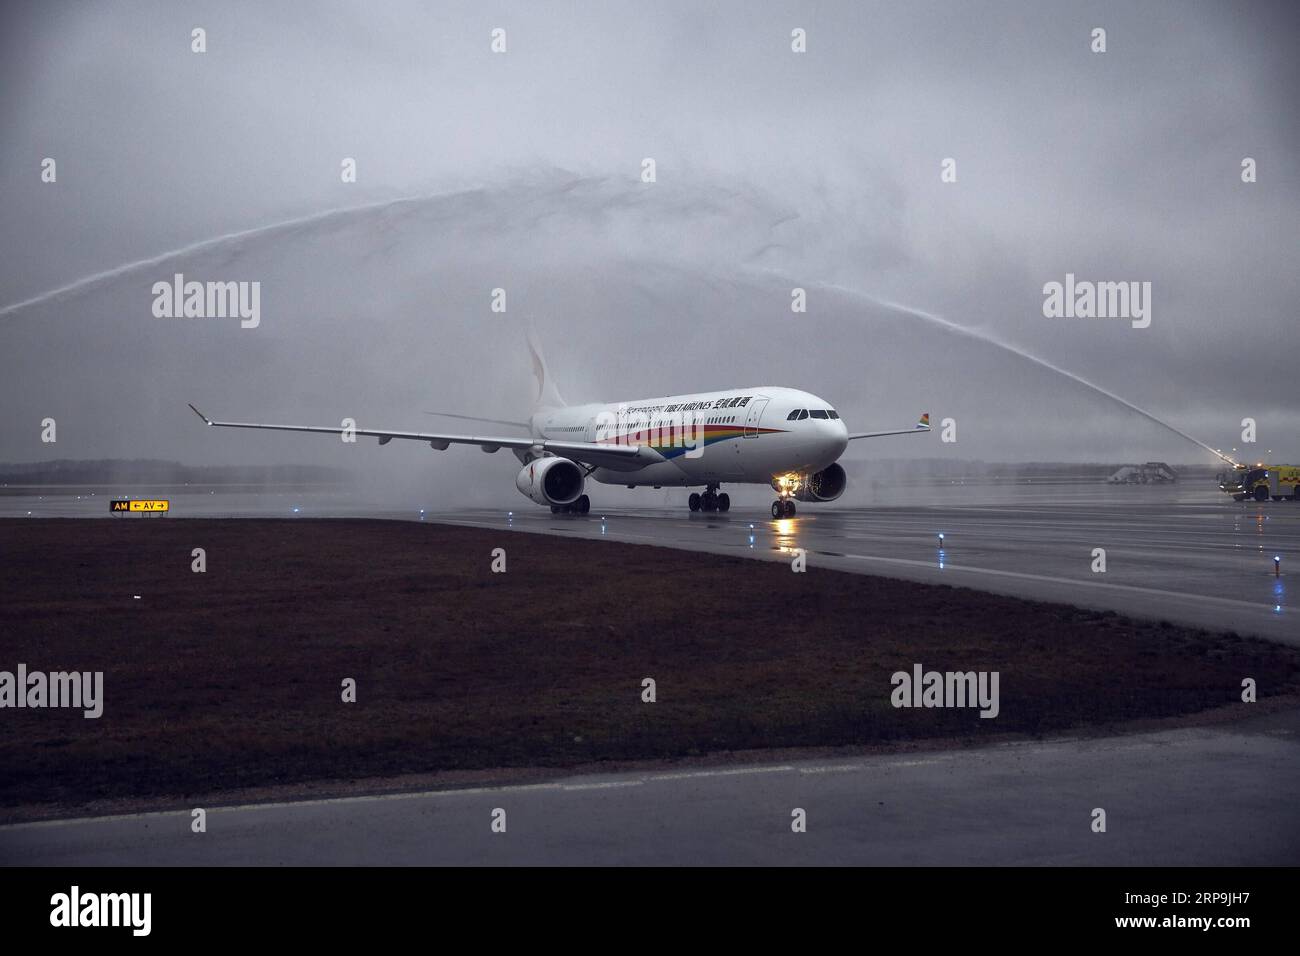 (190409) -- VANTAA, April 9, 2019 (Xinhua) -- Tibet Airlines inaugural flight from Jinan, the capital city of eastern China s Shandong Province, lands at the Helsinki-Vantaa International Airport in Finland, April 8, 2019. An Airbus 330 operated by China Tibet Airlines landed at the Helsinki-Vantaa International Airport late on Monday, opening the weekly direct flights between Jinan, Shandong Province of China and Helsinki, capital of Finland. Tibet Airlines has one flight to Finland every week in April and will possibly run two weekly flights in June. (Xinhua/Finavia) FINLAND-VANTAA-TIBET AIR Stock Photo